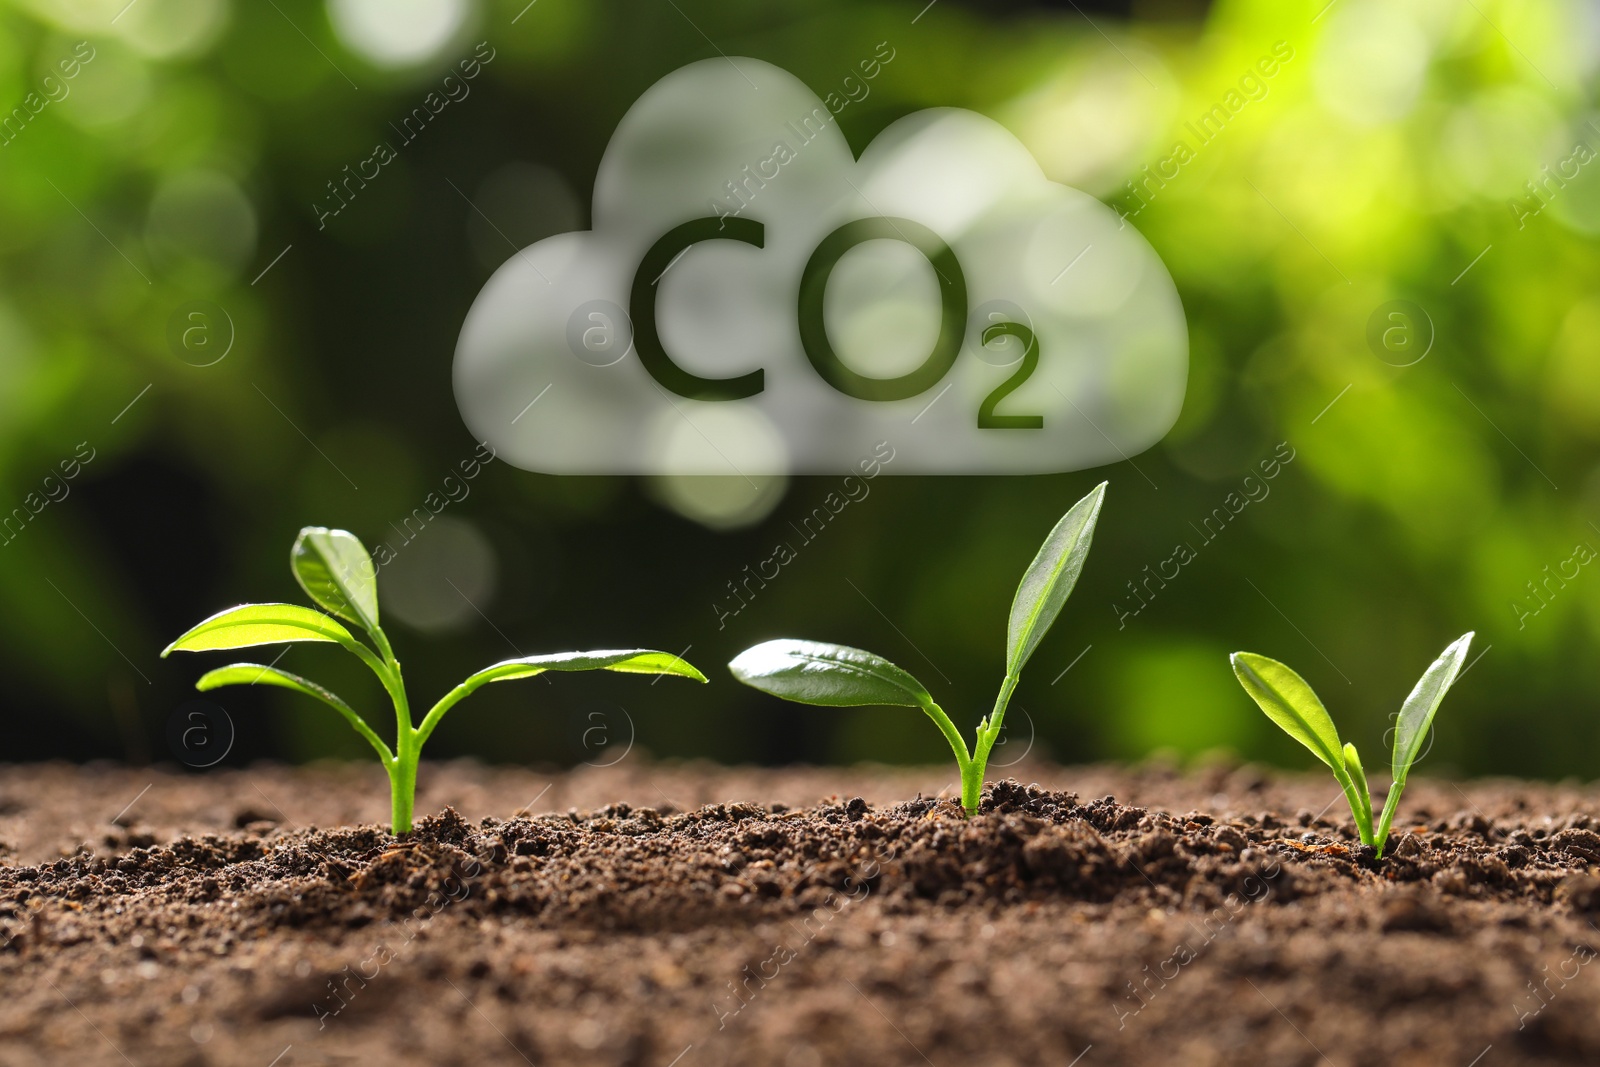 Image of Reduce CO2 emissions. Fresh green seedlings growing outdoors